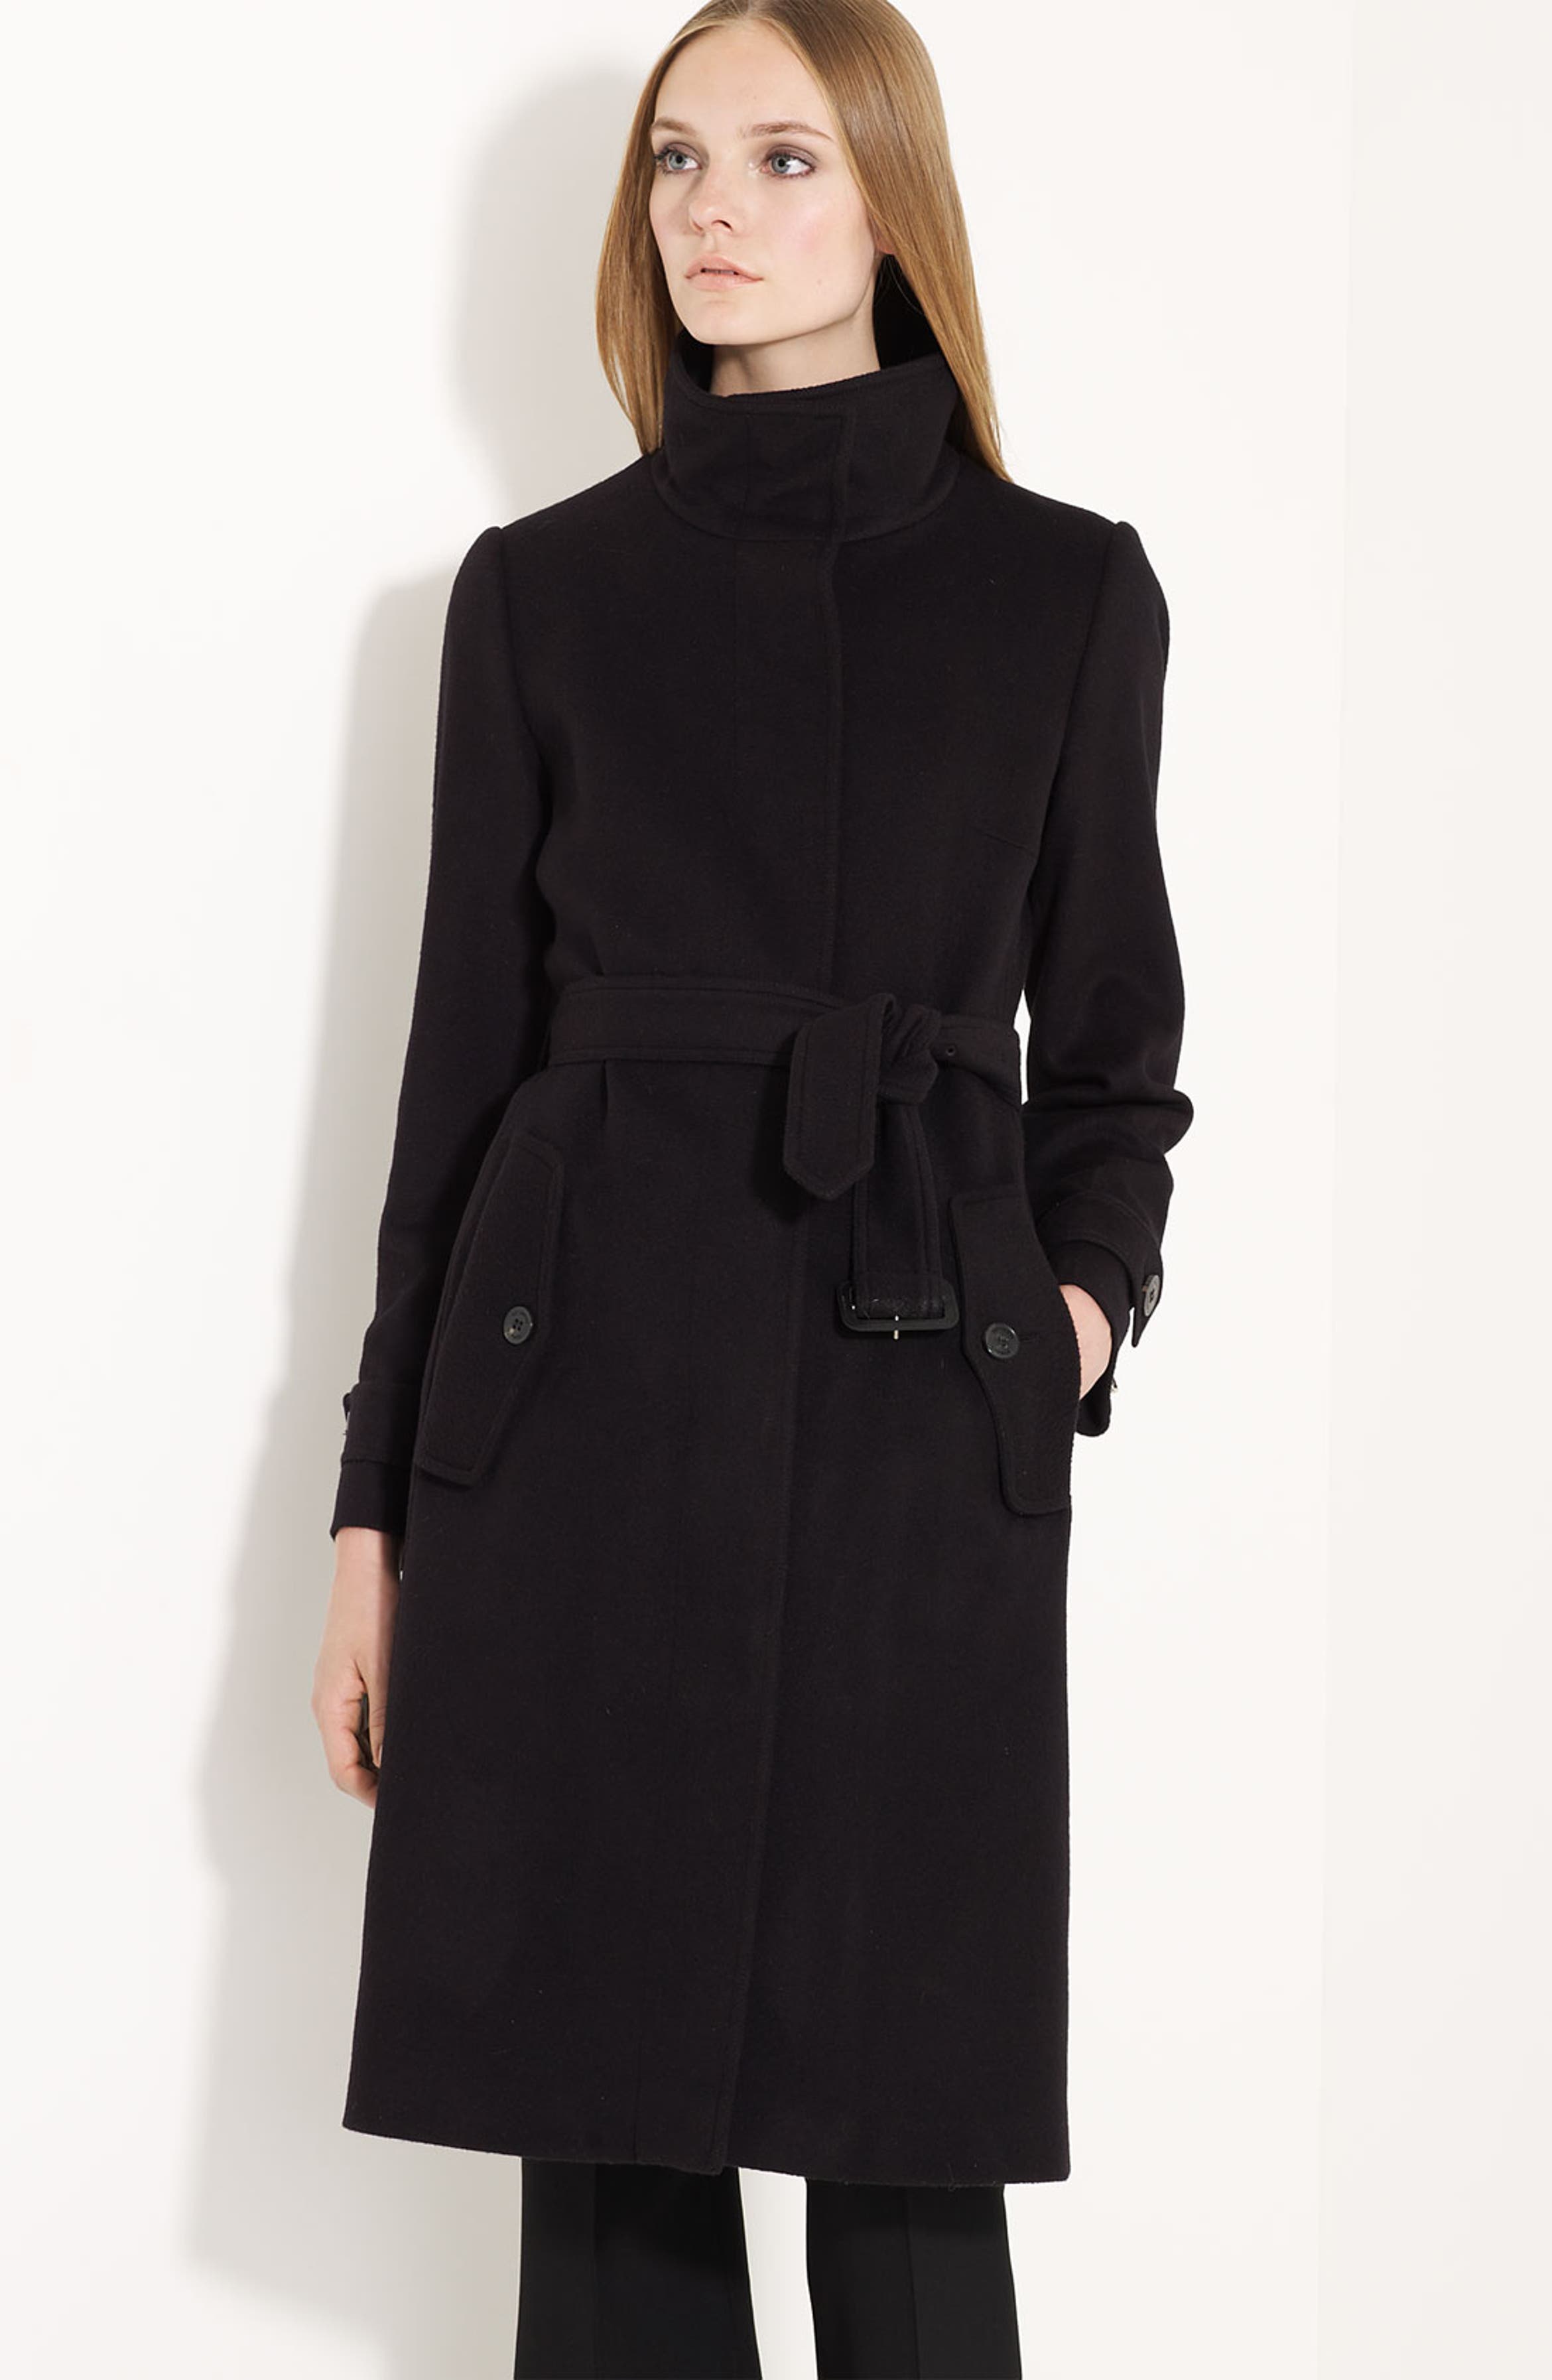 Burberry London Wool & Cashmere Coat | Nordstrom